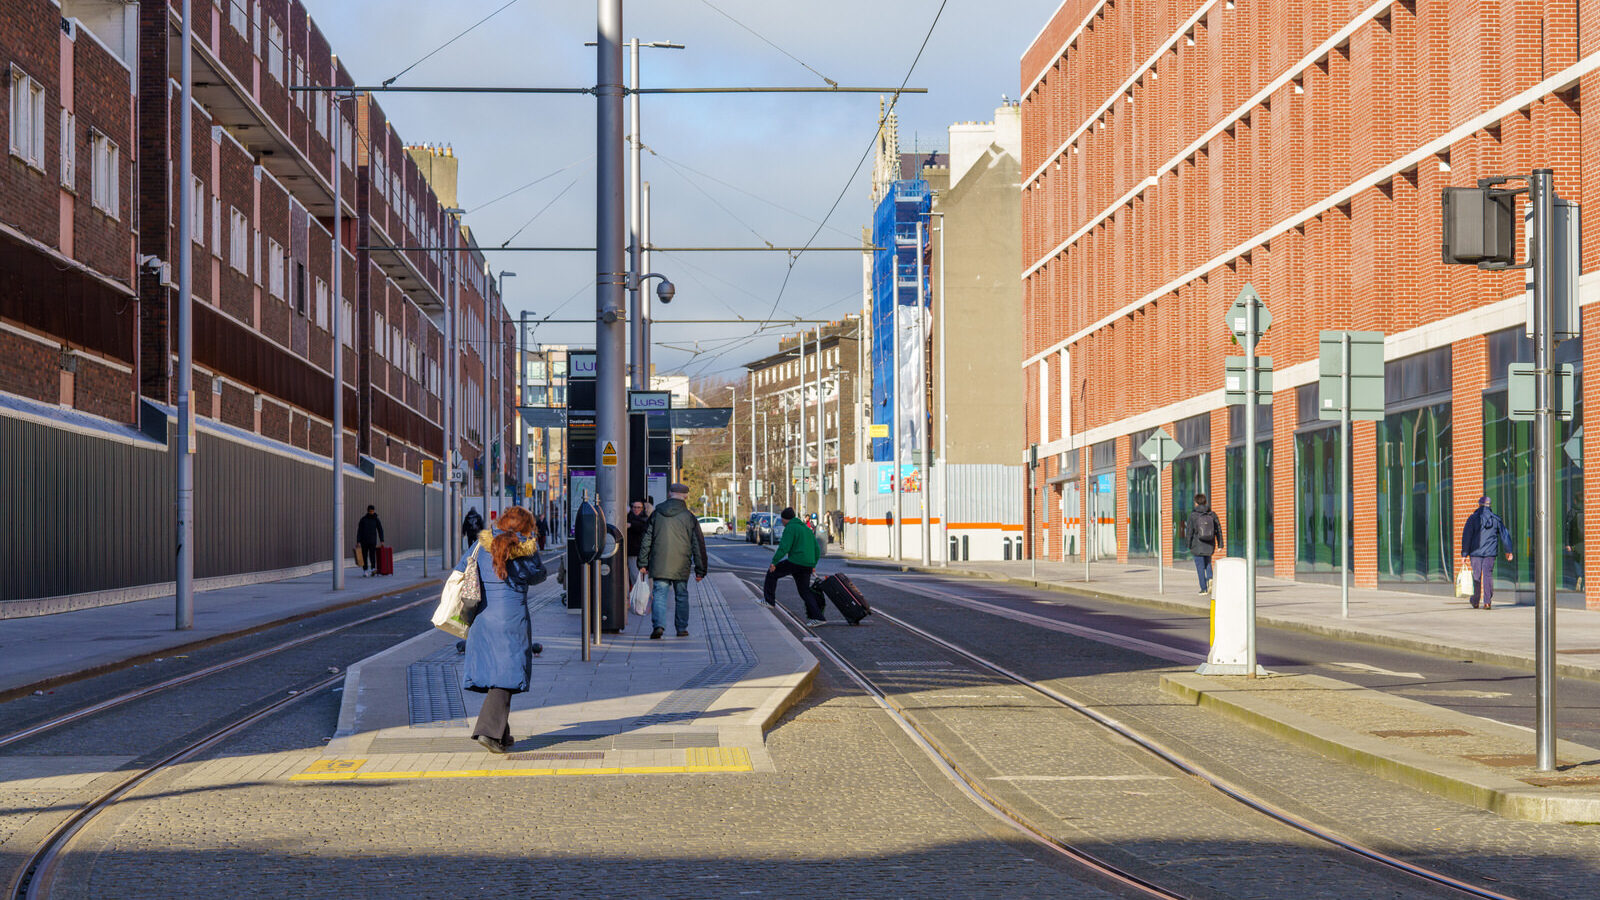 LUAS TRAM STOP AT LOWER DOMINICK STREET [AT THE MOMENT THE AREA DOES FEEL SAFER]-228697-1